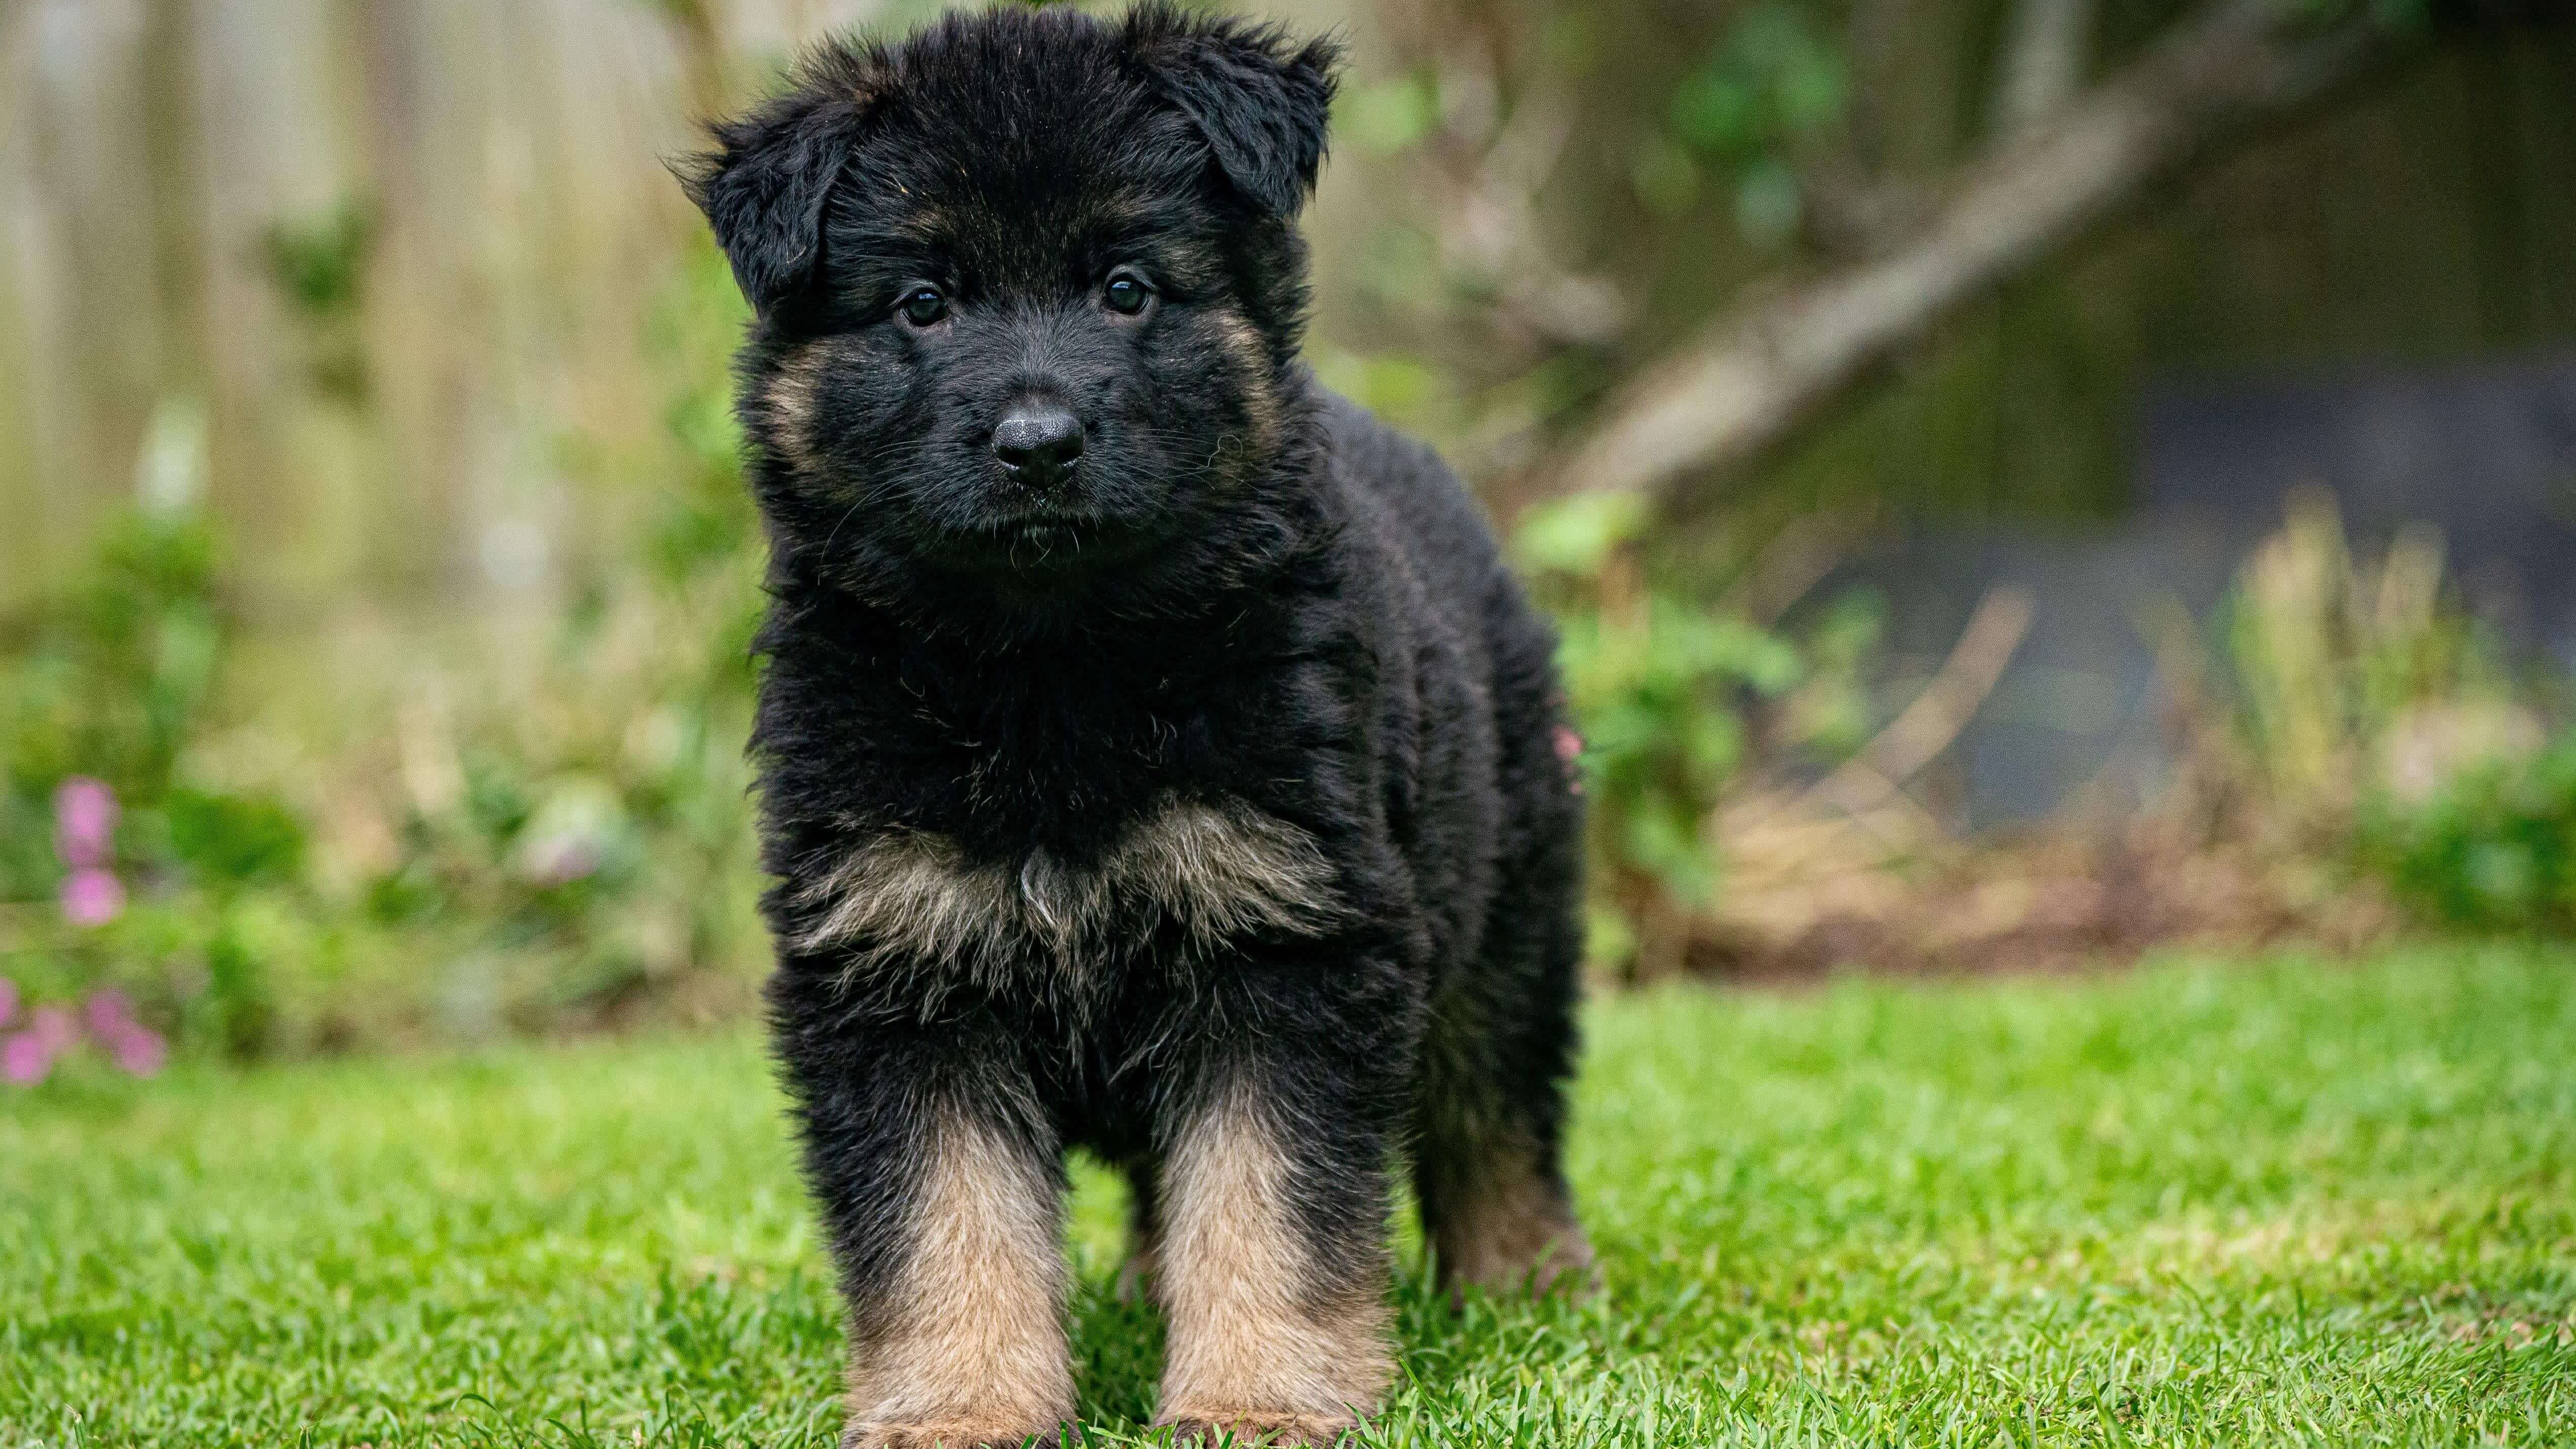 A dark-featured black and tan German shepherd puppy at six weeks old stand on a lawn and looks to the camera